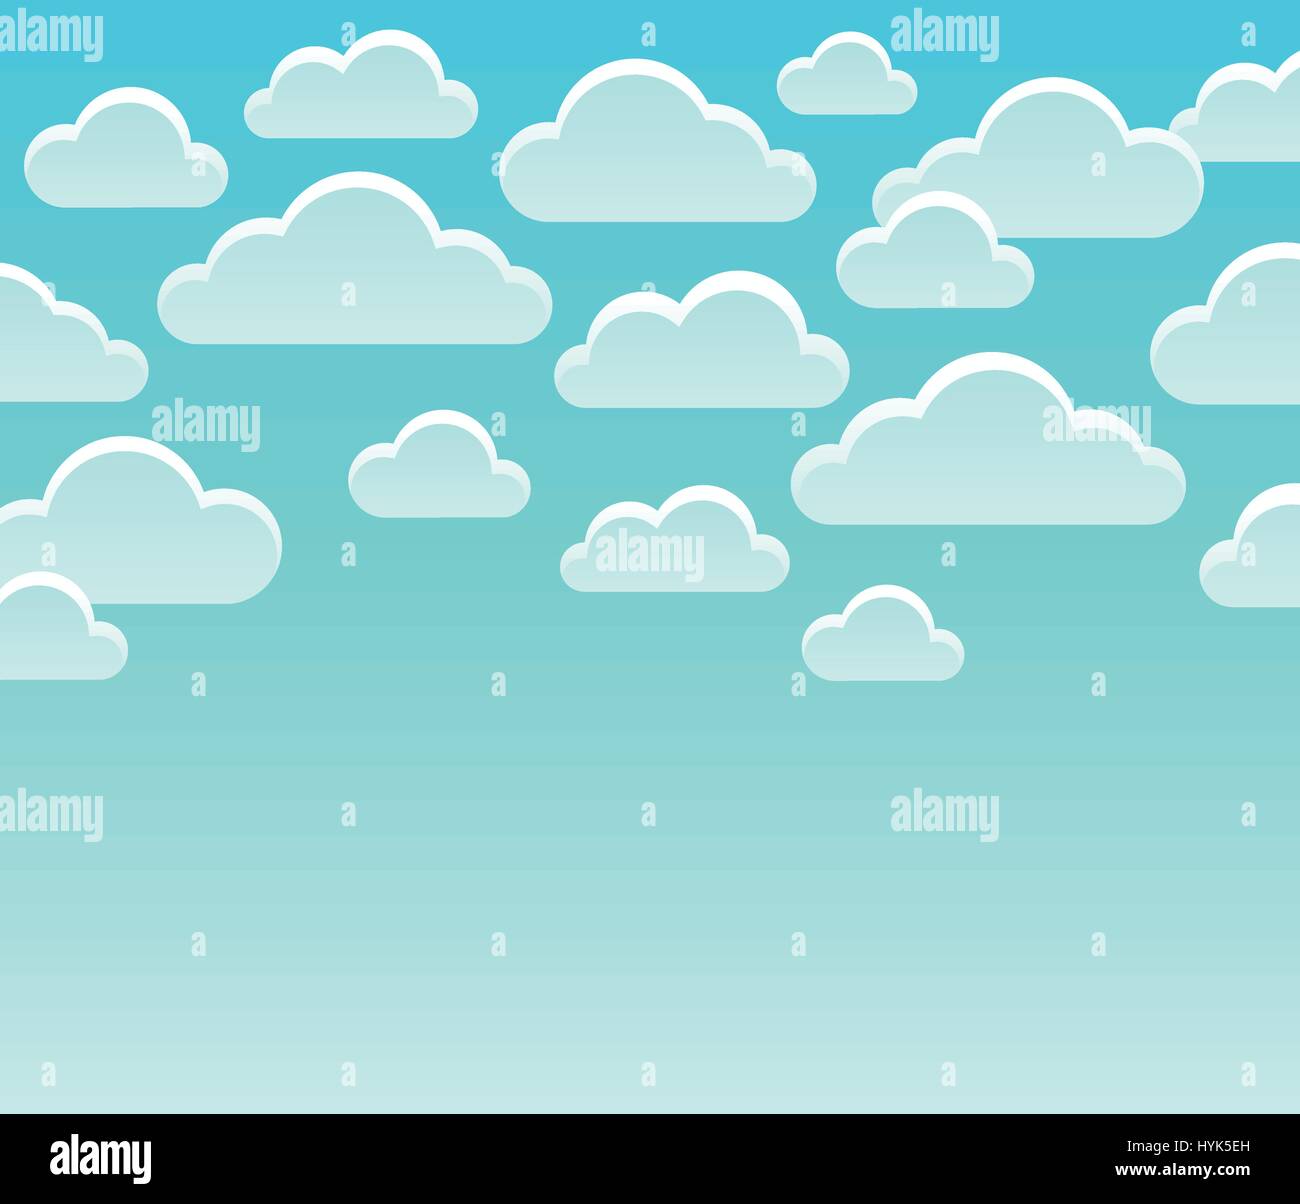 Stylized clouds theme image 7 - eps10 vector illustration. Stock Vector